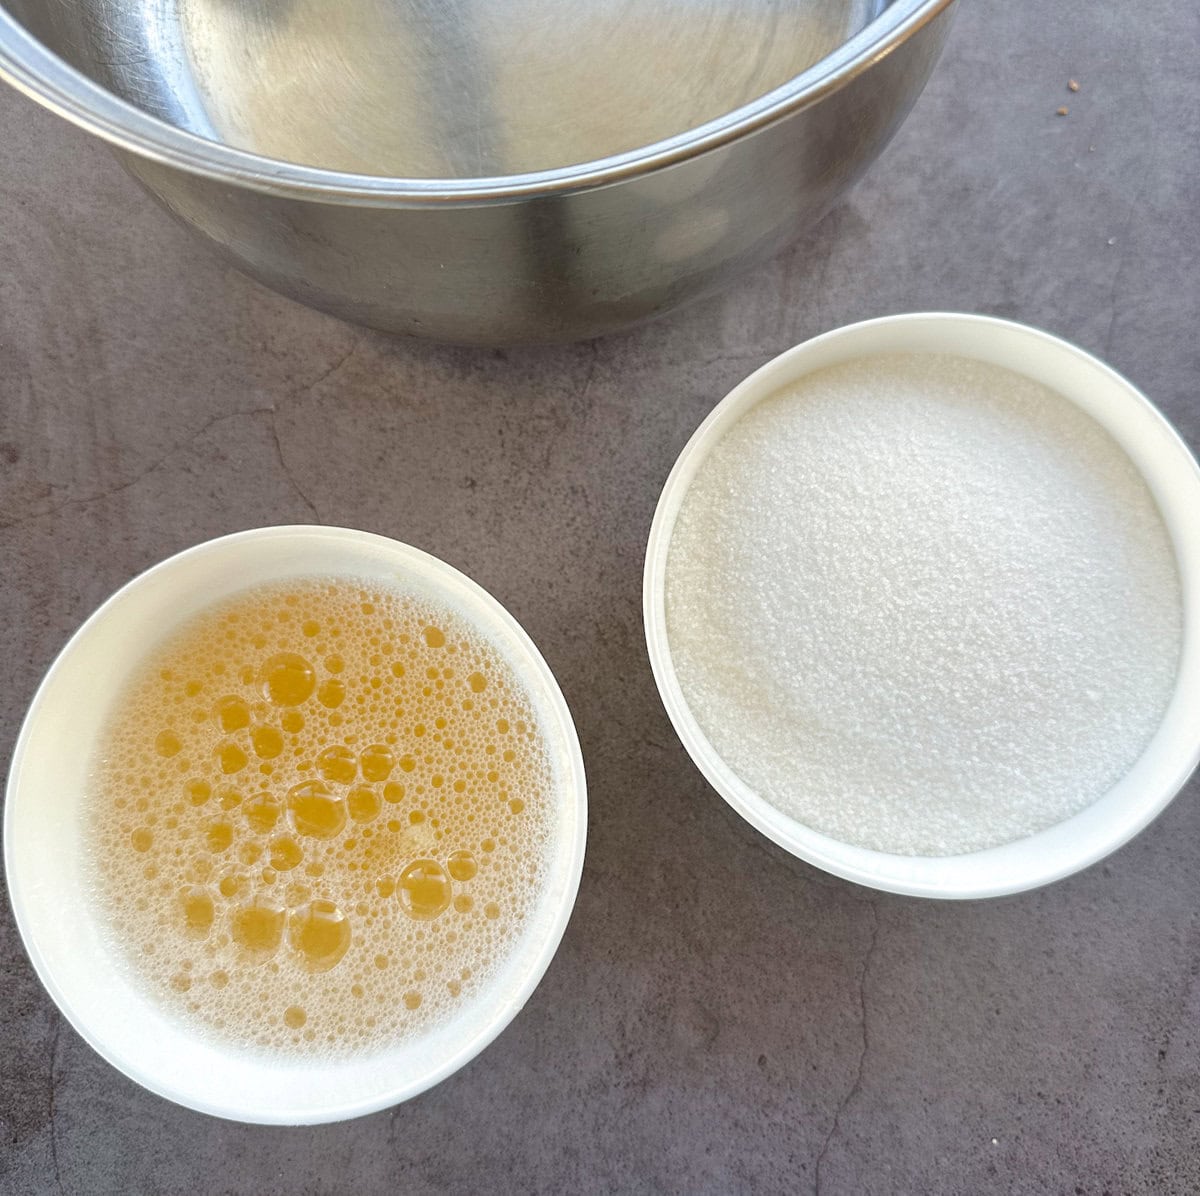 How to make gelatine in boiling water so that it does not clump